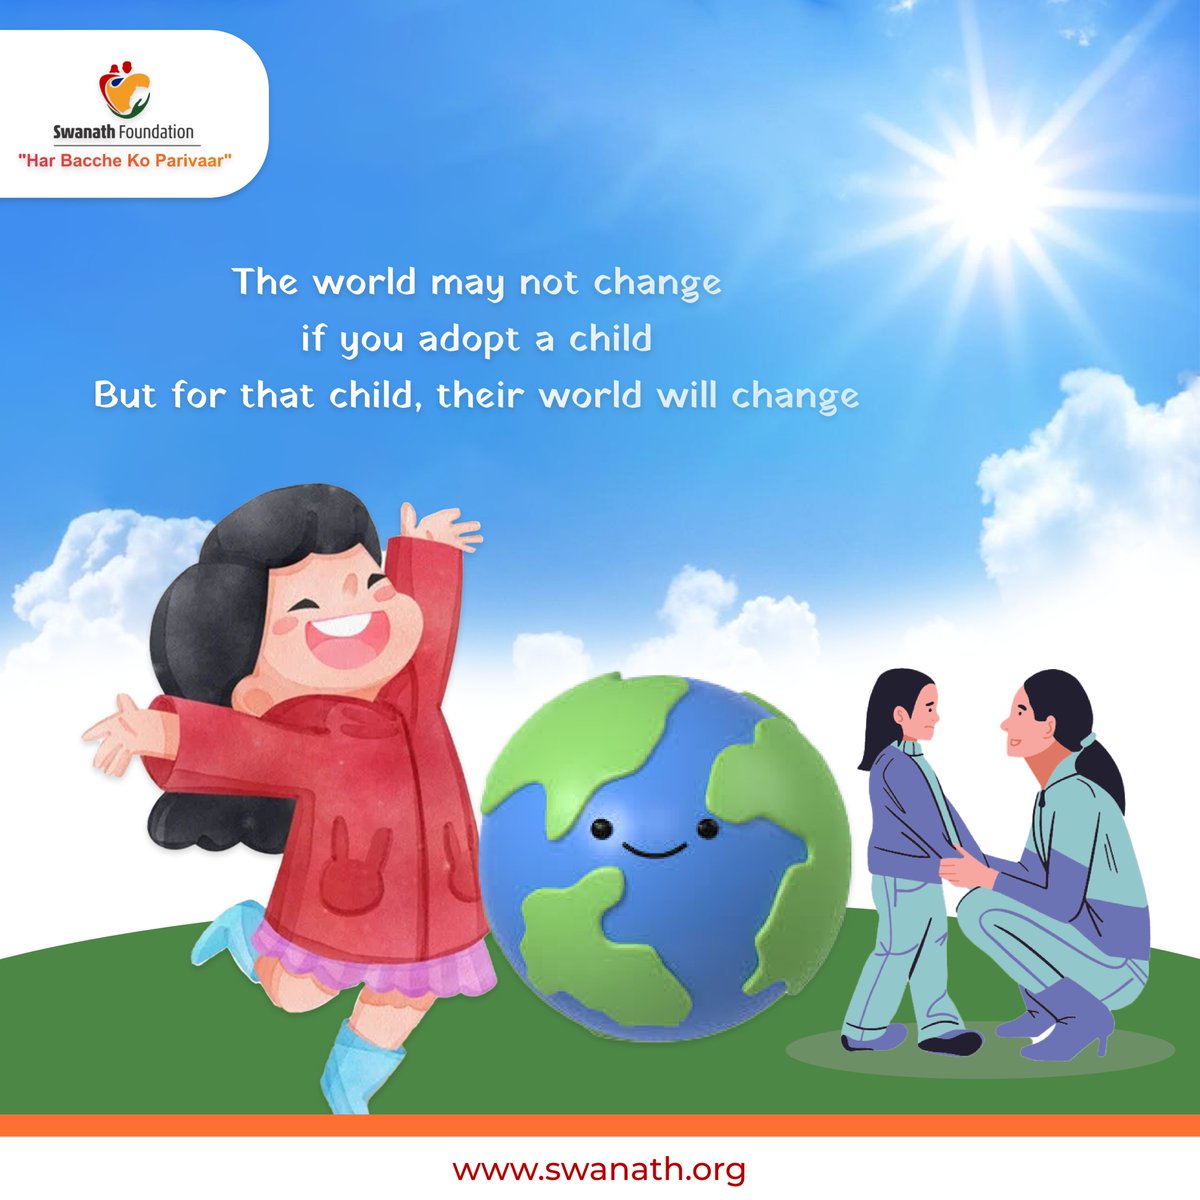 Embrace change, one child at a time. When you adopt, you're not just changing a life, you're changing the world. Join us in spreading love and hope with every adoption. #SwanathFoundation #AdoptChange #MakeADifference